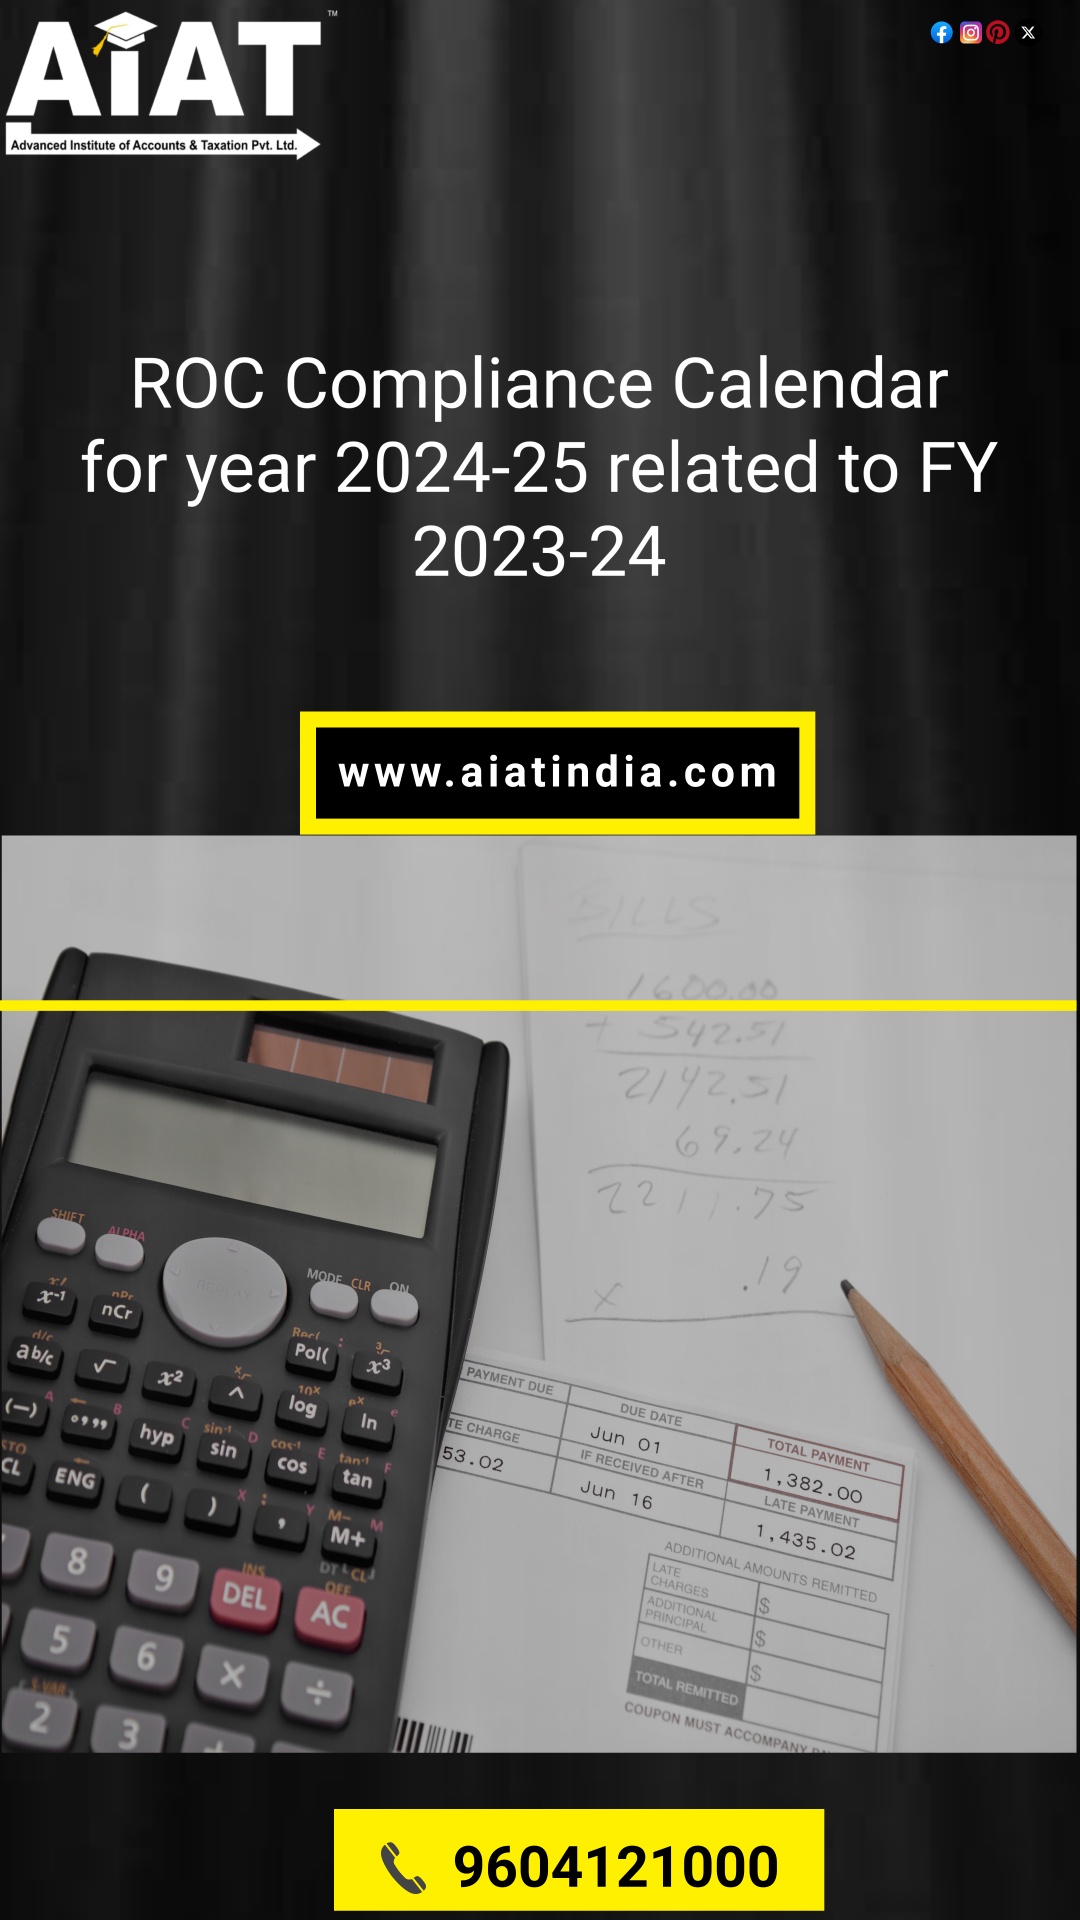 ROC Compliance Calendar for year 2024-25 related to FY 2023-24